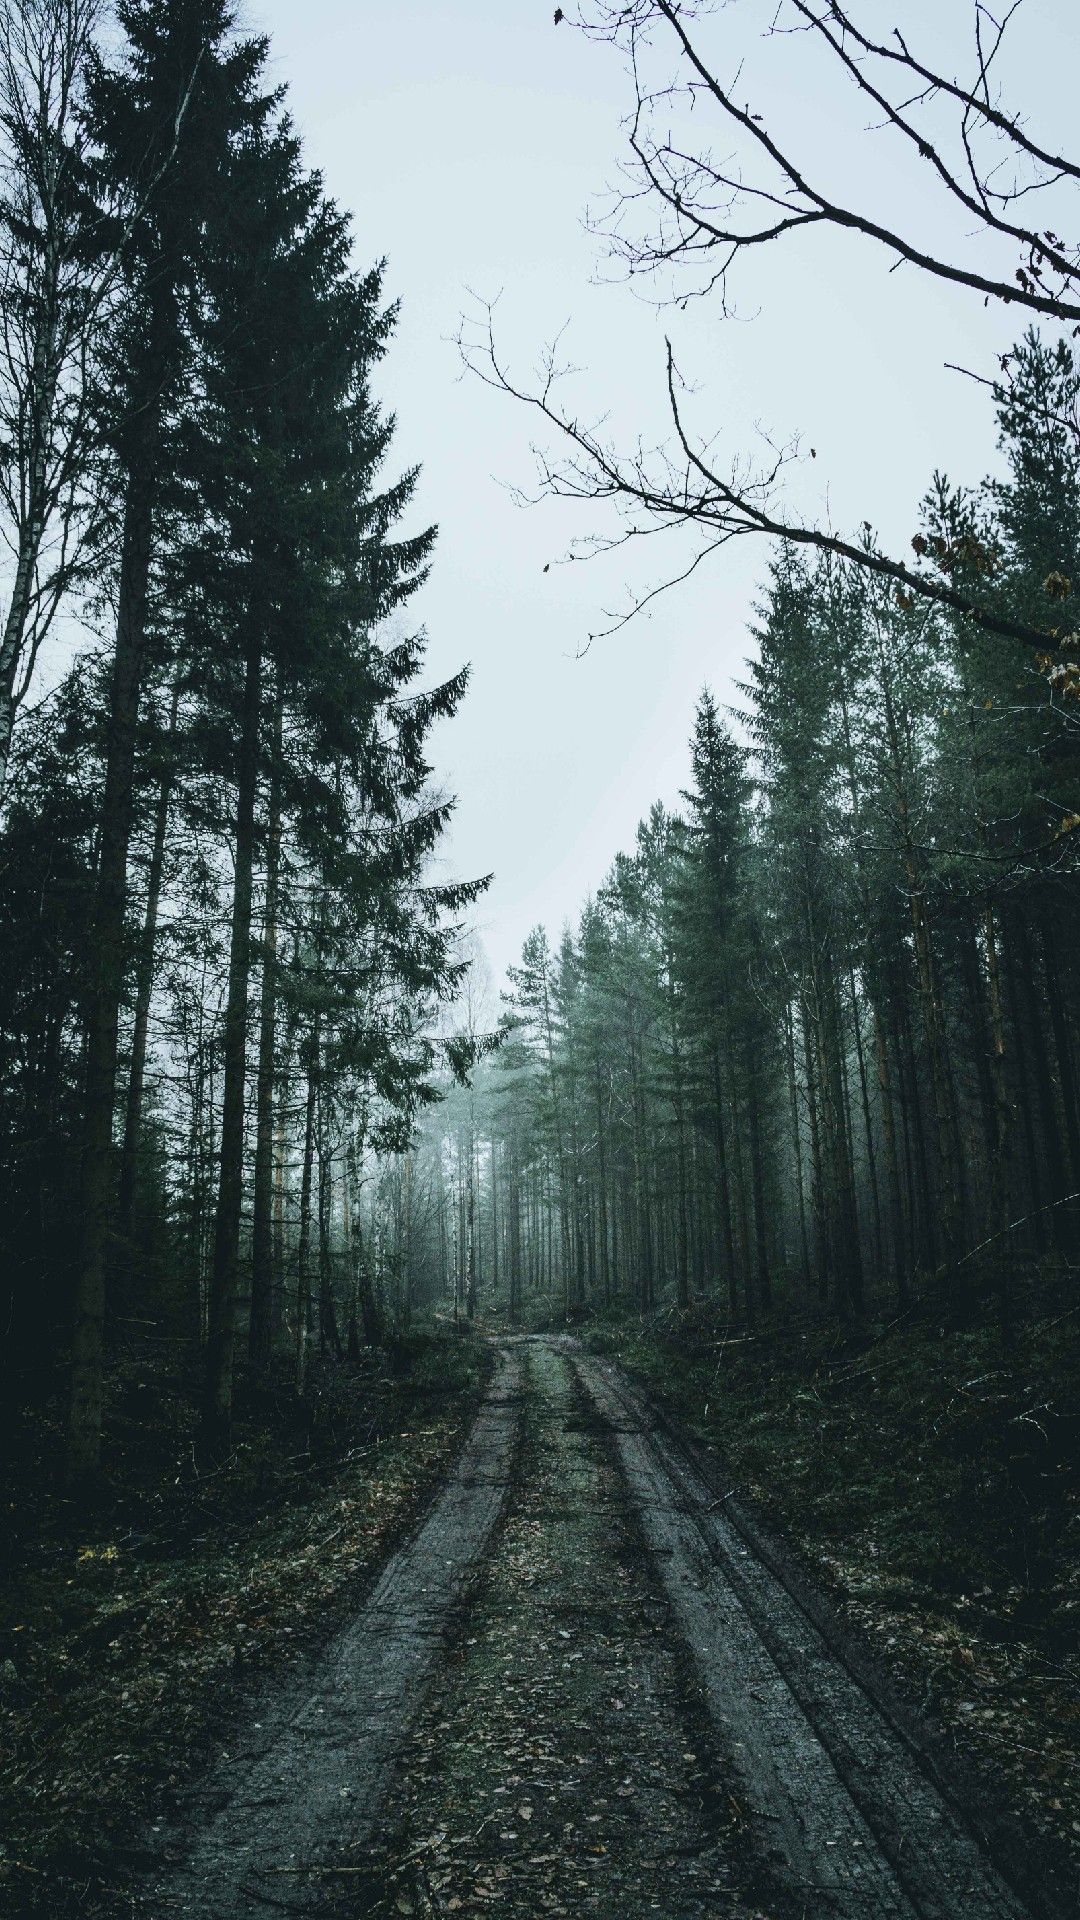 Overcast Road Phone Wallpaper Lockscreen HD 4K Android iOS iPhone /over. Forest picture, Forest wallpaper, Nature photography